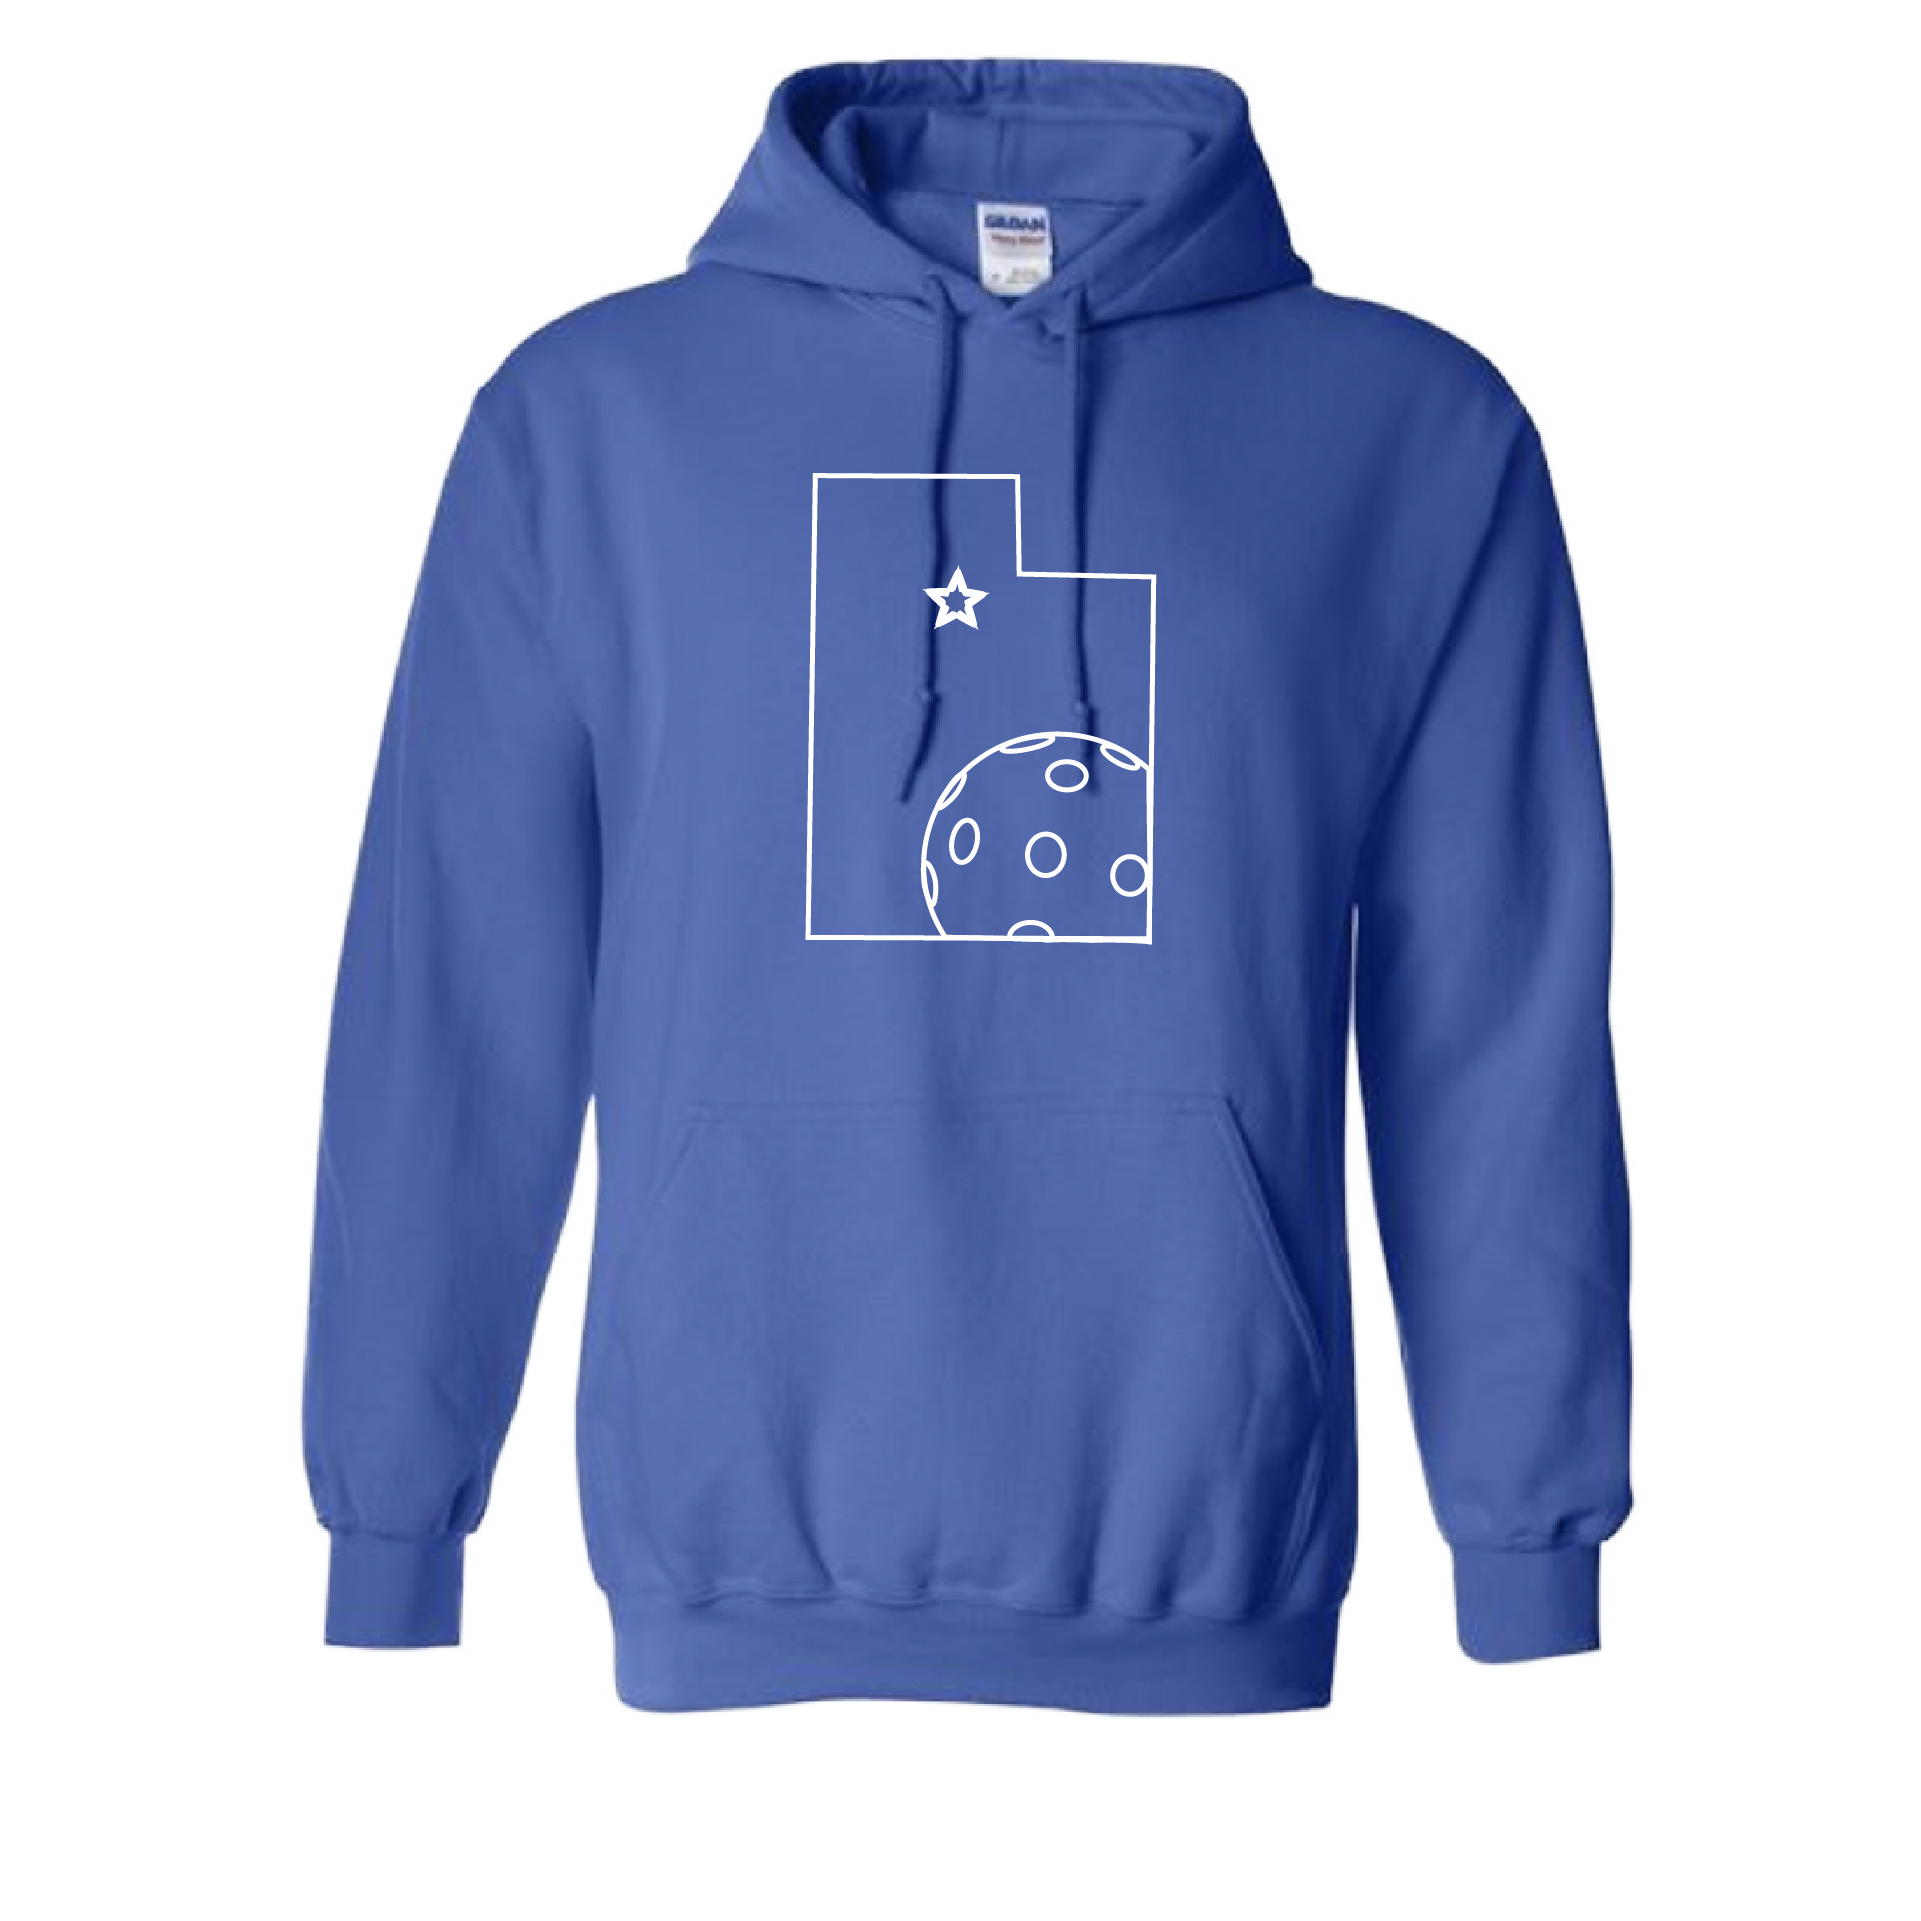 Pickleball Design: Utah Pickleball.   Unisex Hooded Sweatshirt: Moisture-wicking, double-lined hood, front pouch pocket.  This unisex hooded sweatshirt is ultra comfortable and soft. Stay warm on the Pickleball courts while being that hit with this one of kind design.